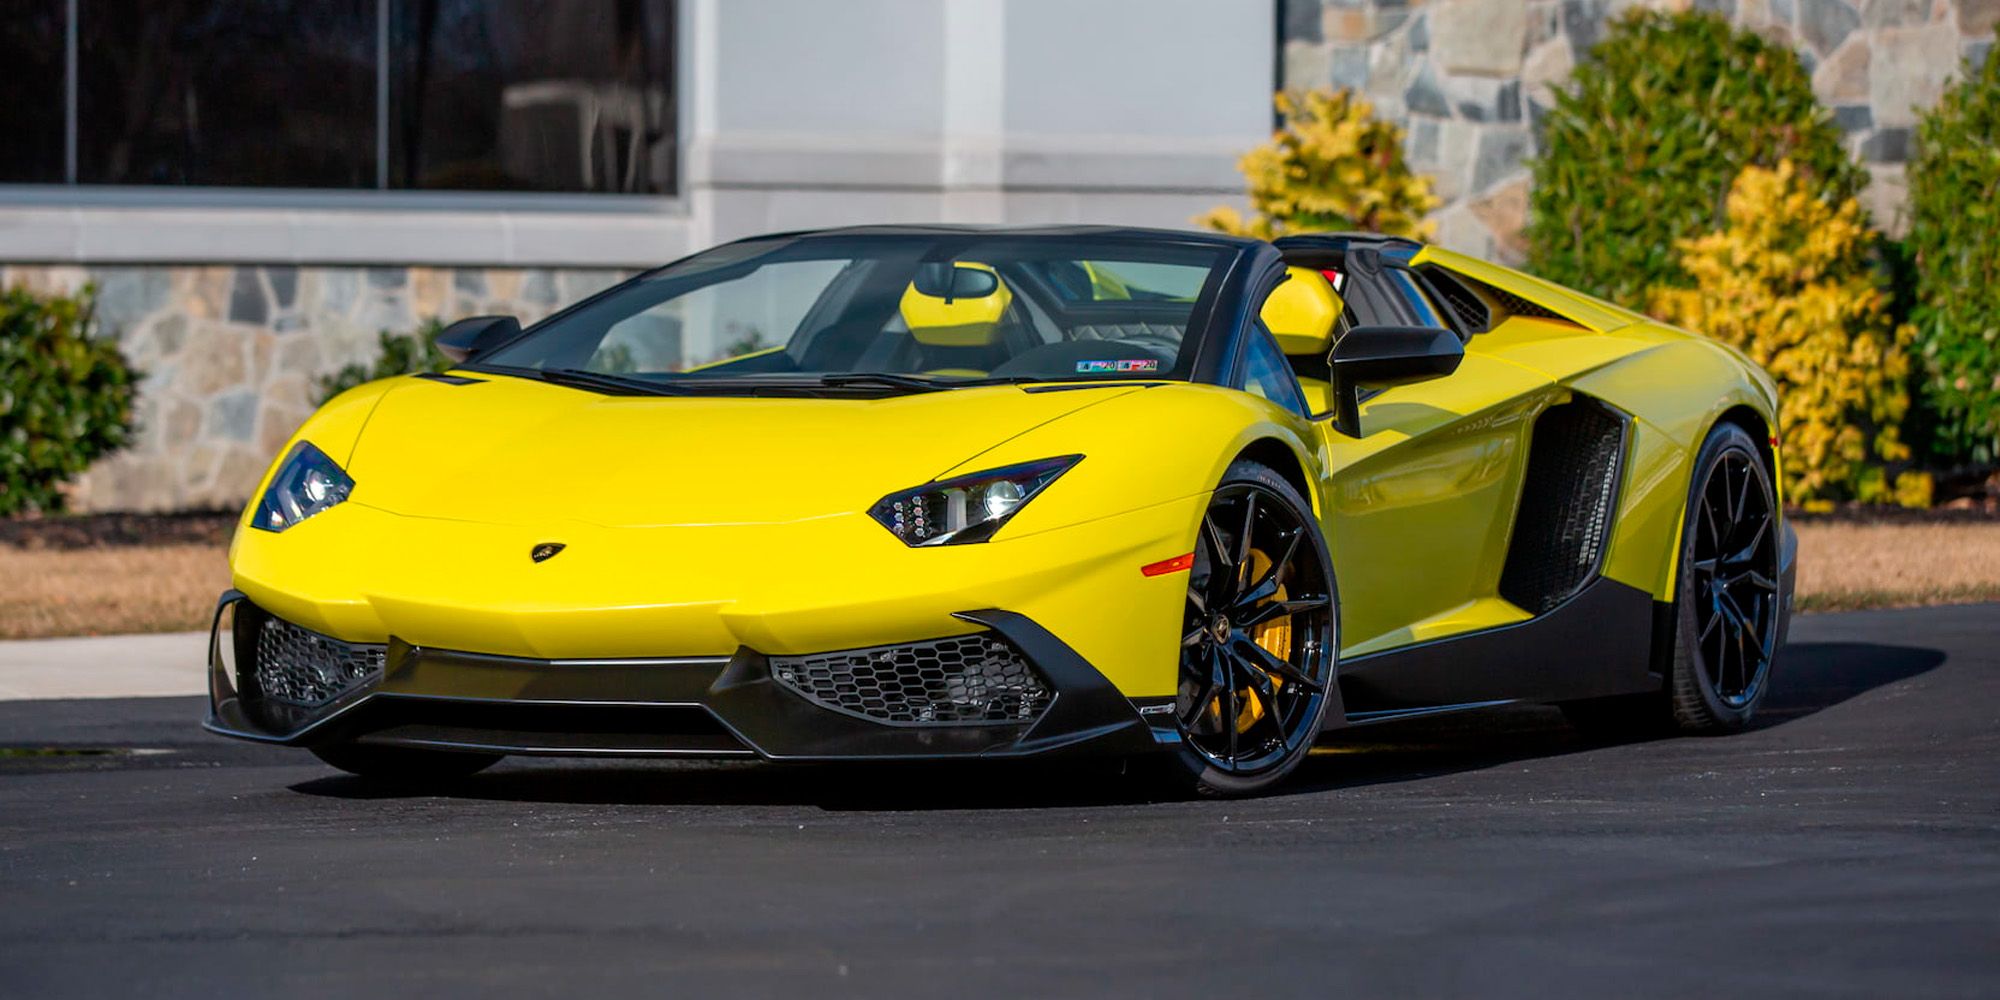 The front of the Aventador LP720-4